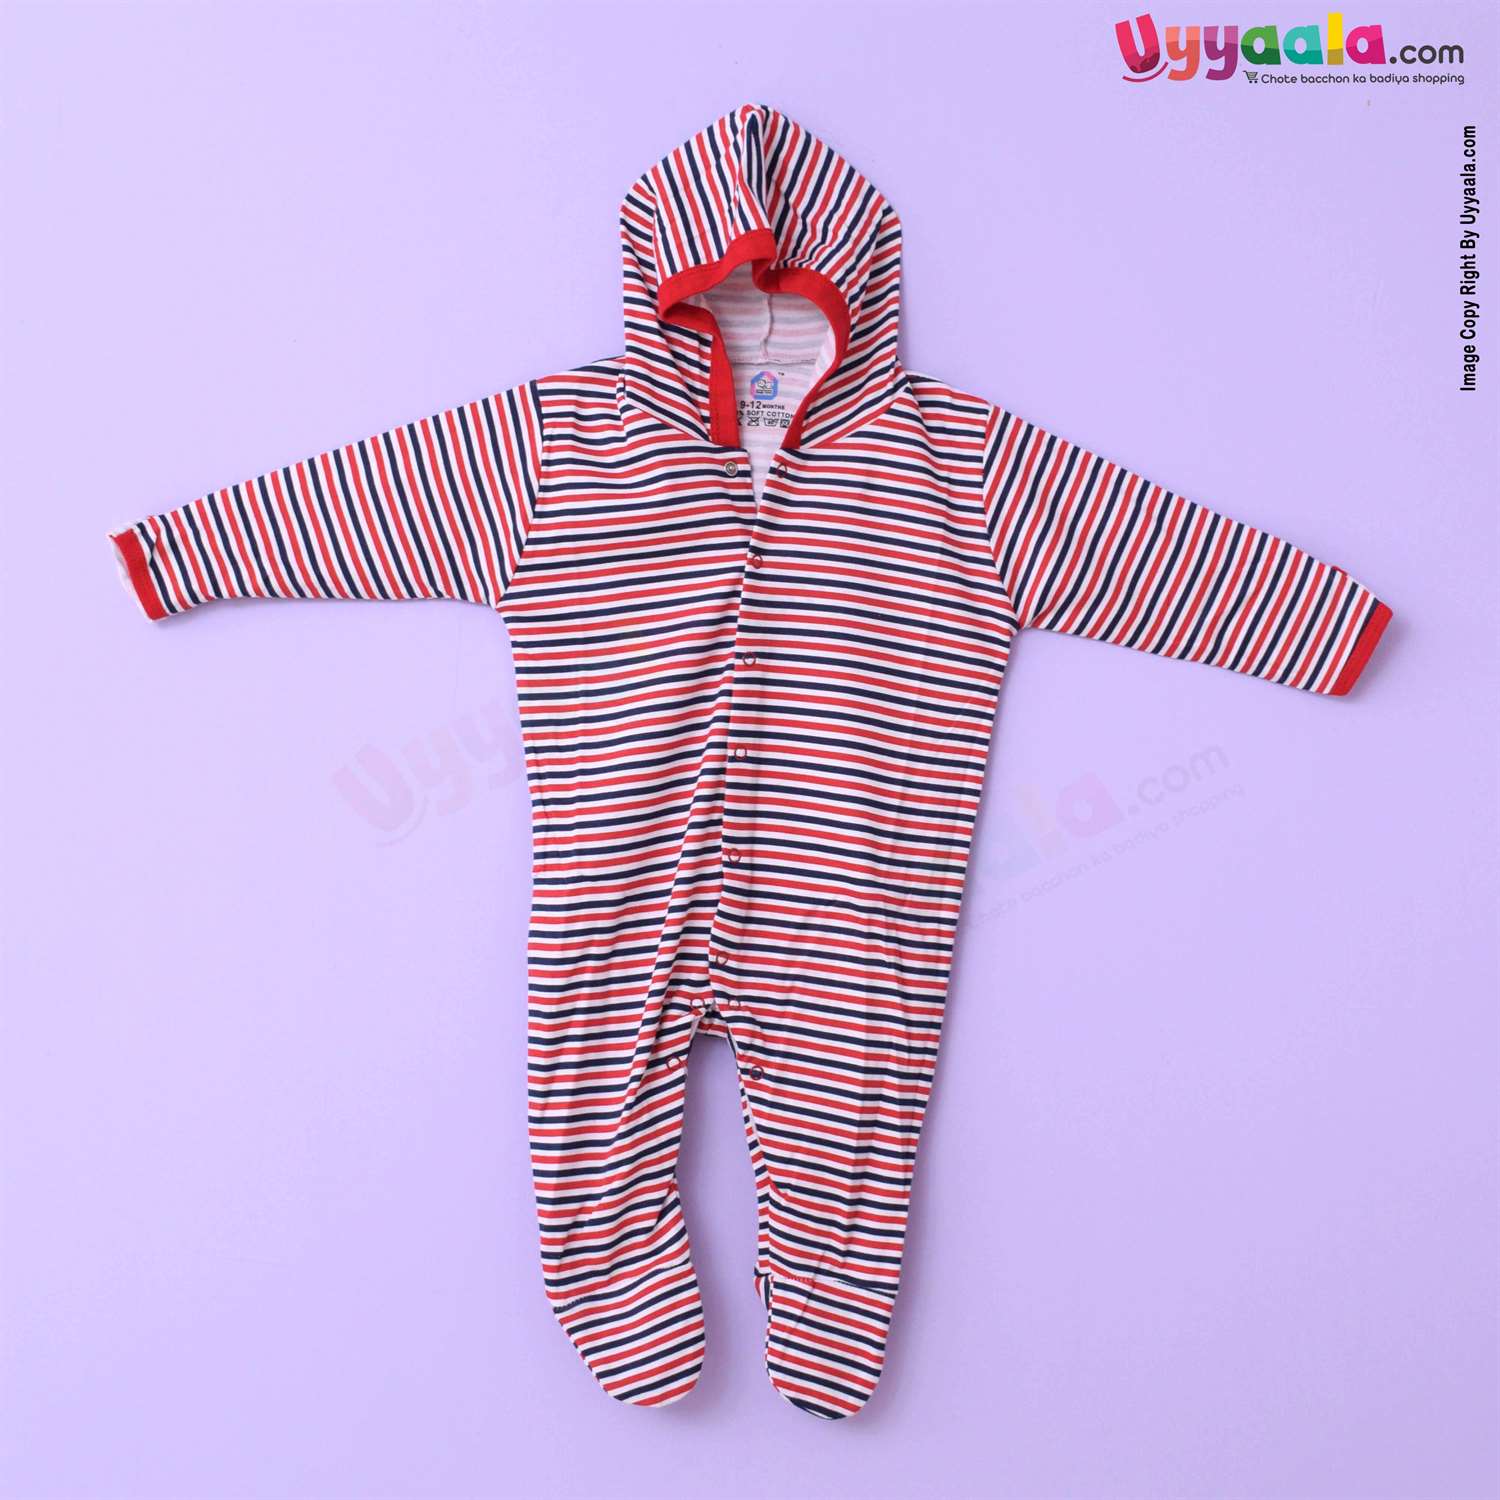 MAGIC TOWN Hooded Sleep Suits For Babies, 2Pcs - Stripes & Car Print, Red & White, (9-12m)